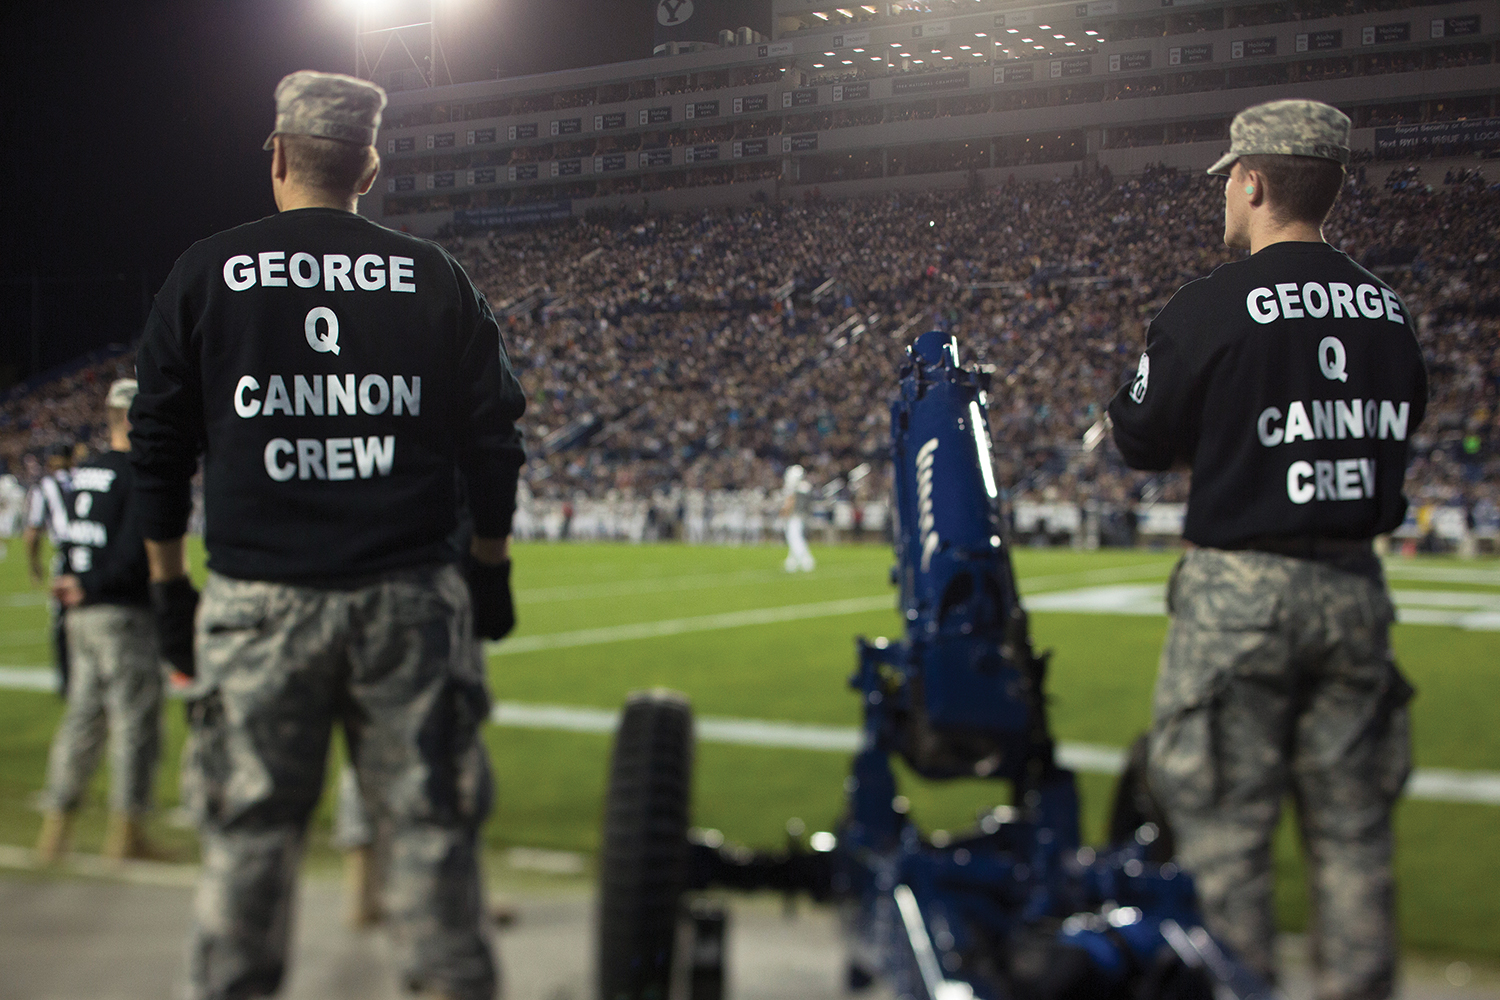 ROTC members stand beside a cannon on the field.